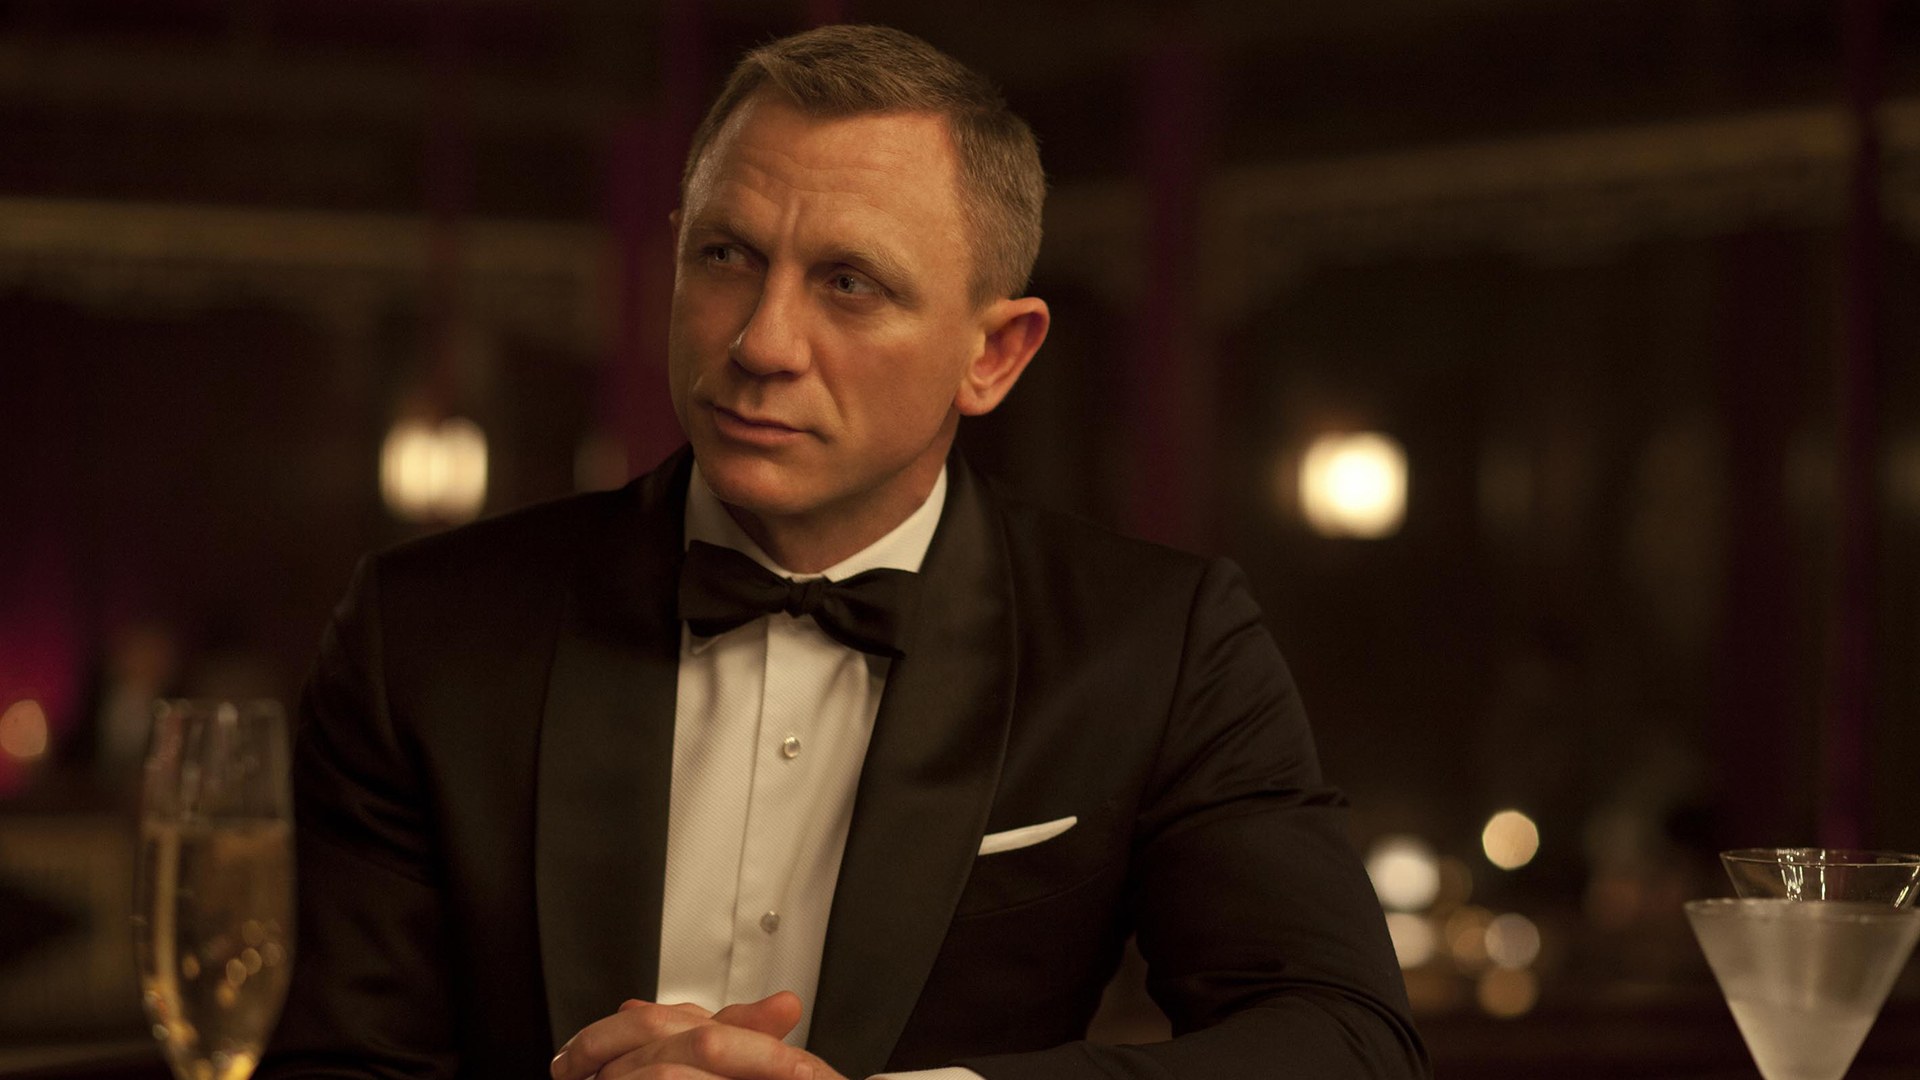 Our First Look At James Bond's No Time To Die (And More Details You Need To Know) Middle East